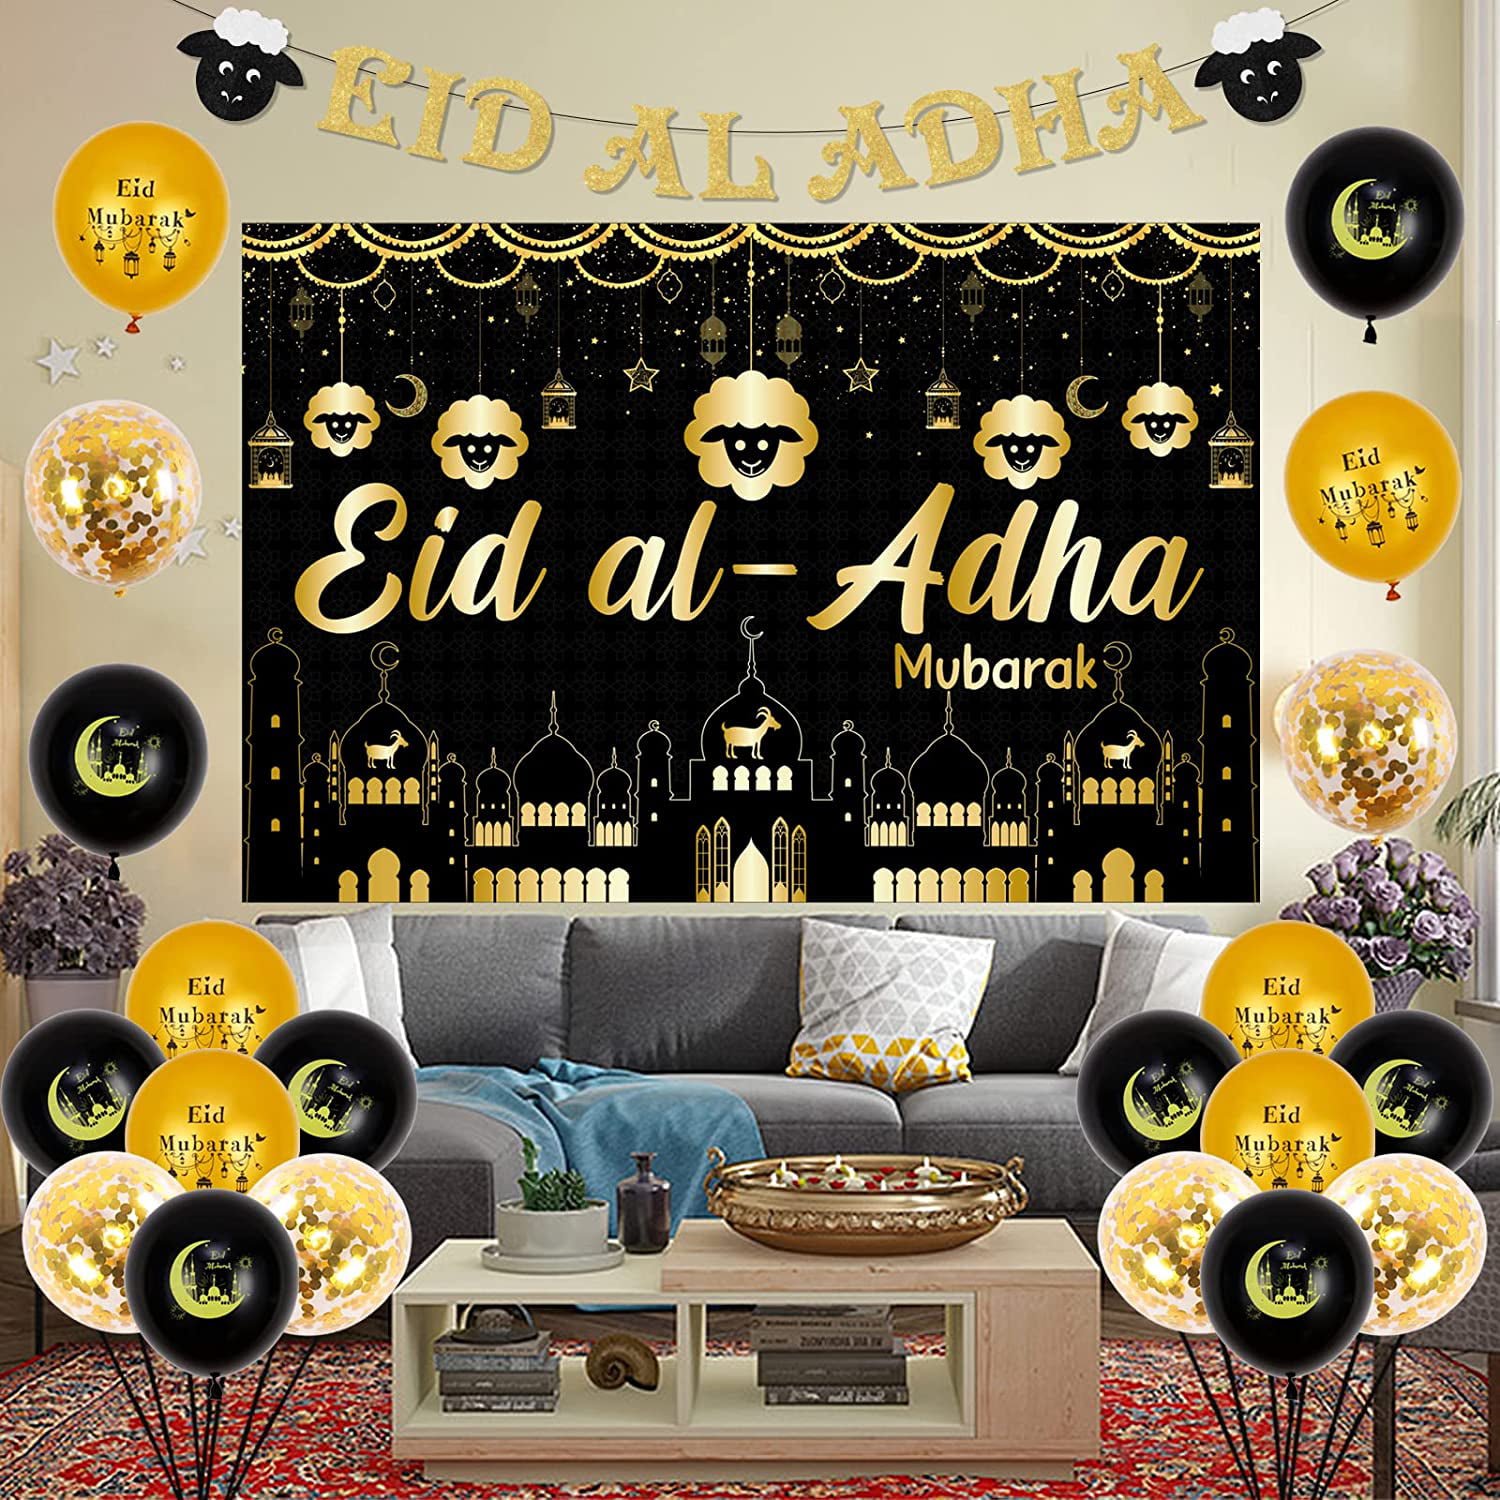 5 Great Home Decor Ideas For this Eid Celebration